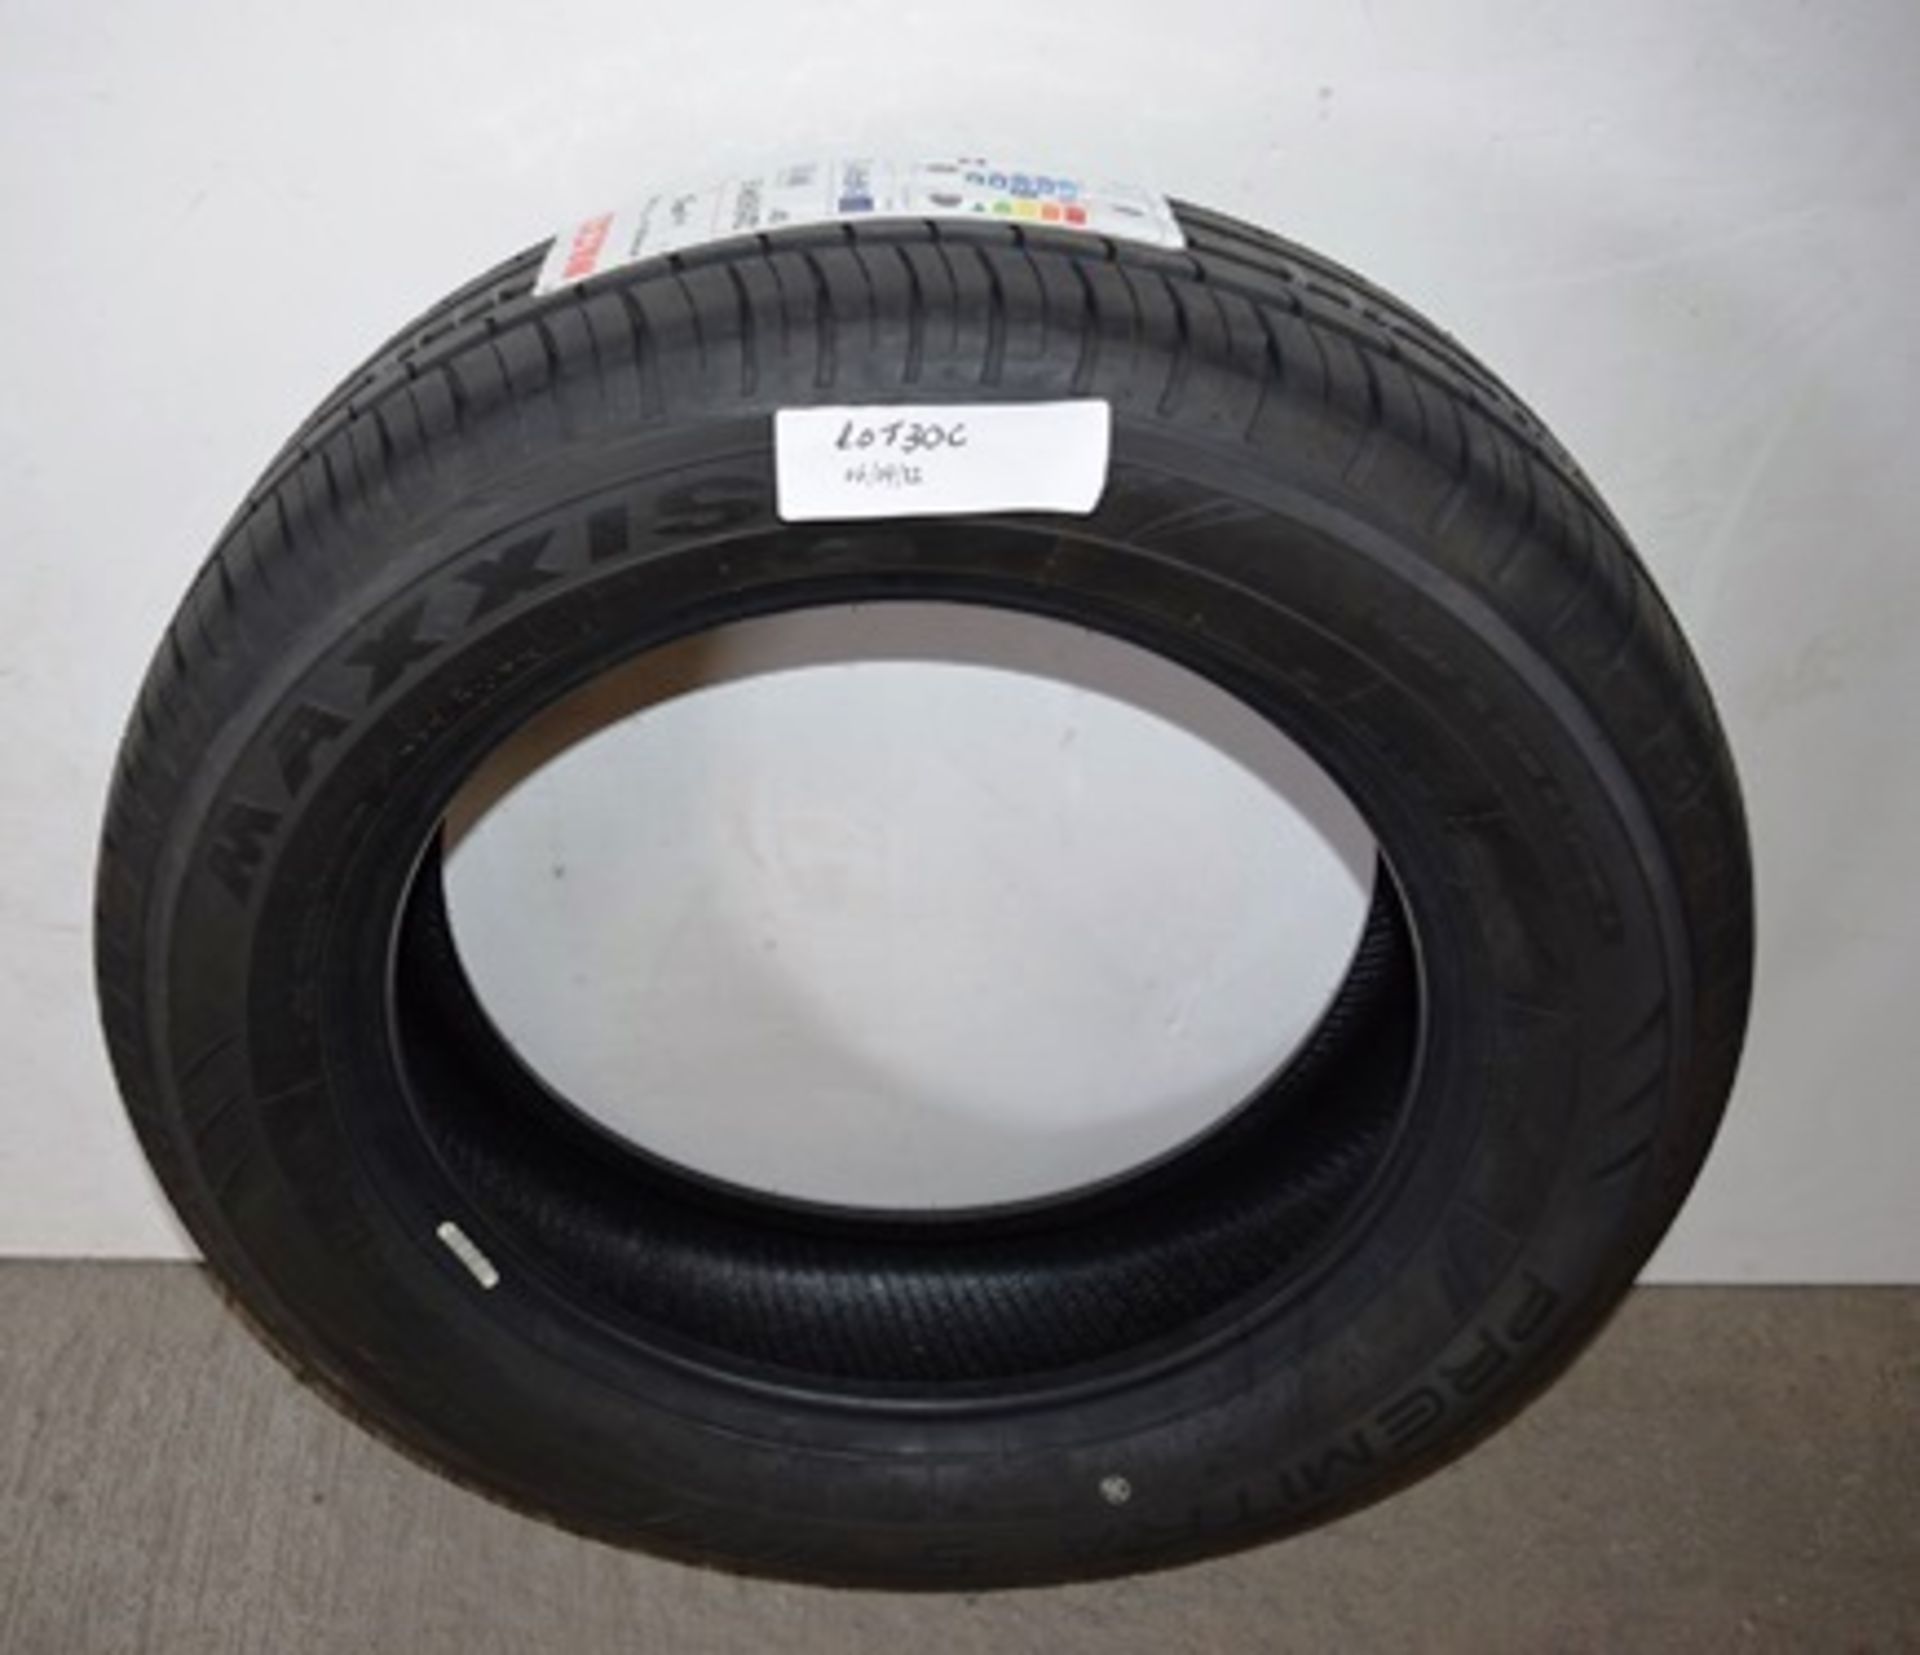 1 x Maxxis Premitra 5 HP 5 tyre, size 205/60R16 92V - New with label (GS4) - Image 2 of 2